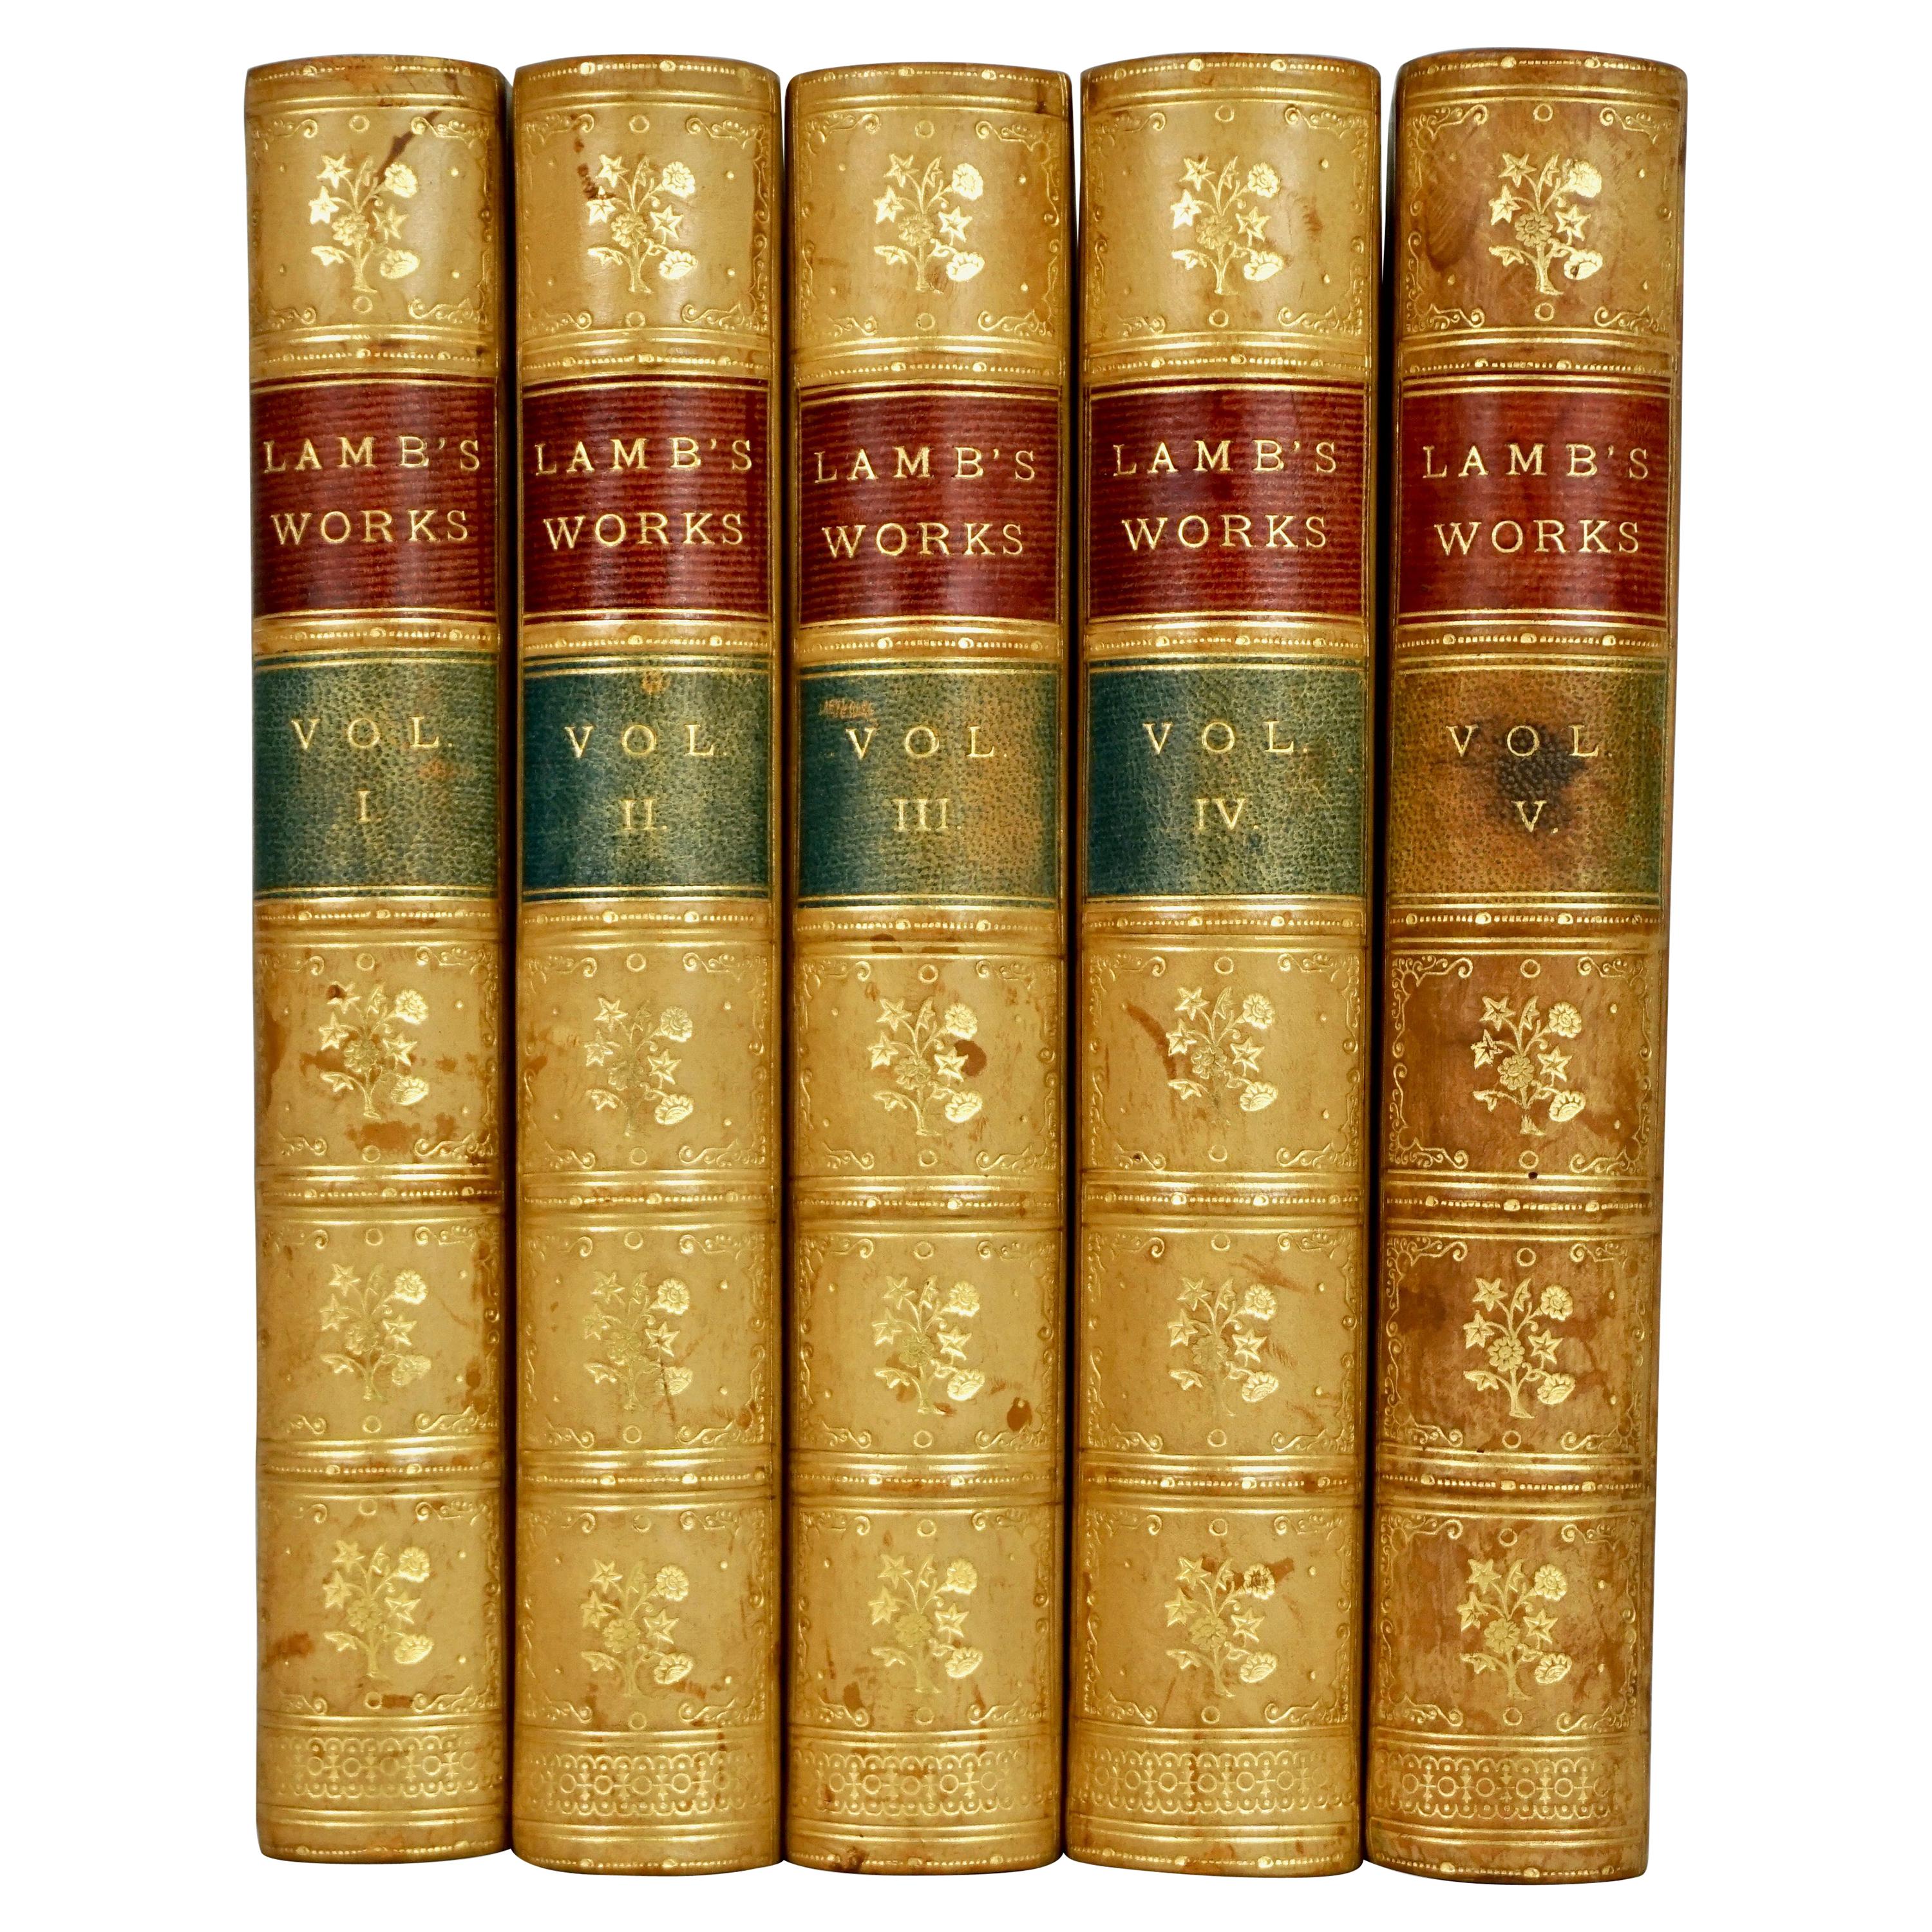 Lambs Works 5 Leather Bound Volumes with Marbleized Endpapers and Marbled Pages